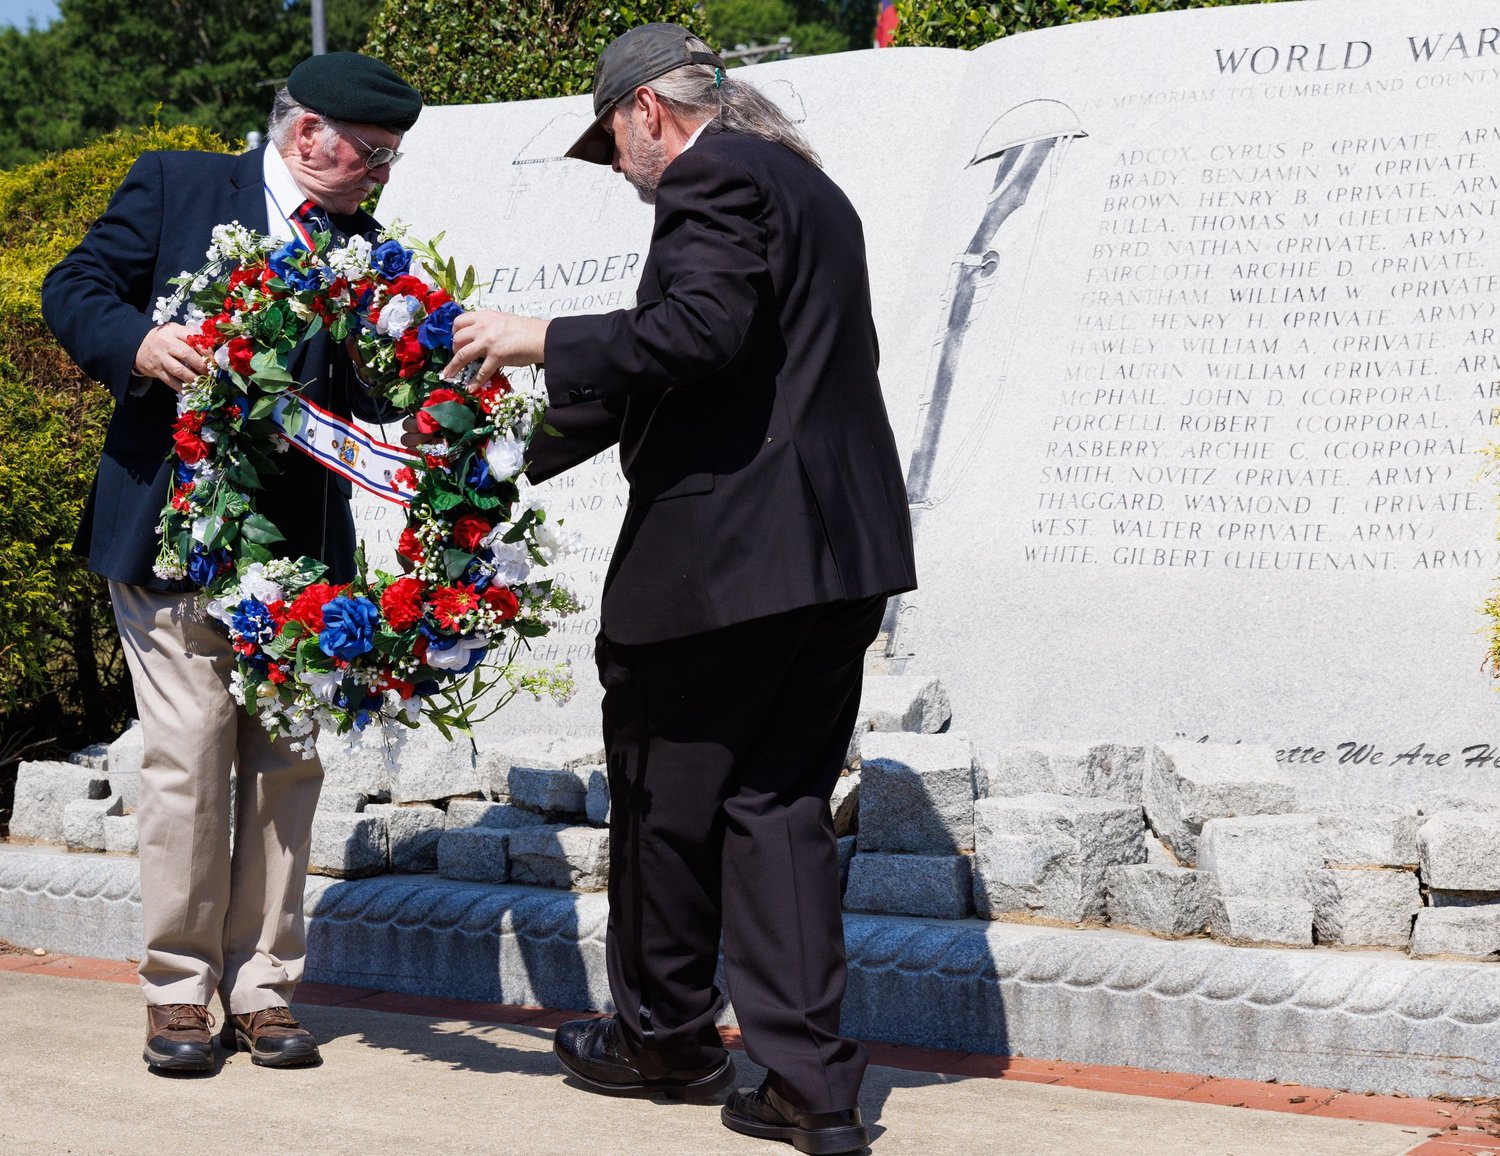 Wreaths were placed at monuments honoring the fallen from various wars.